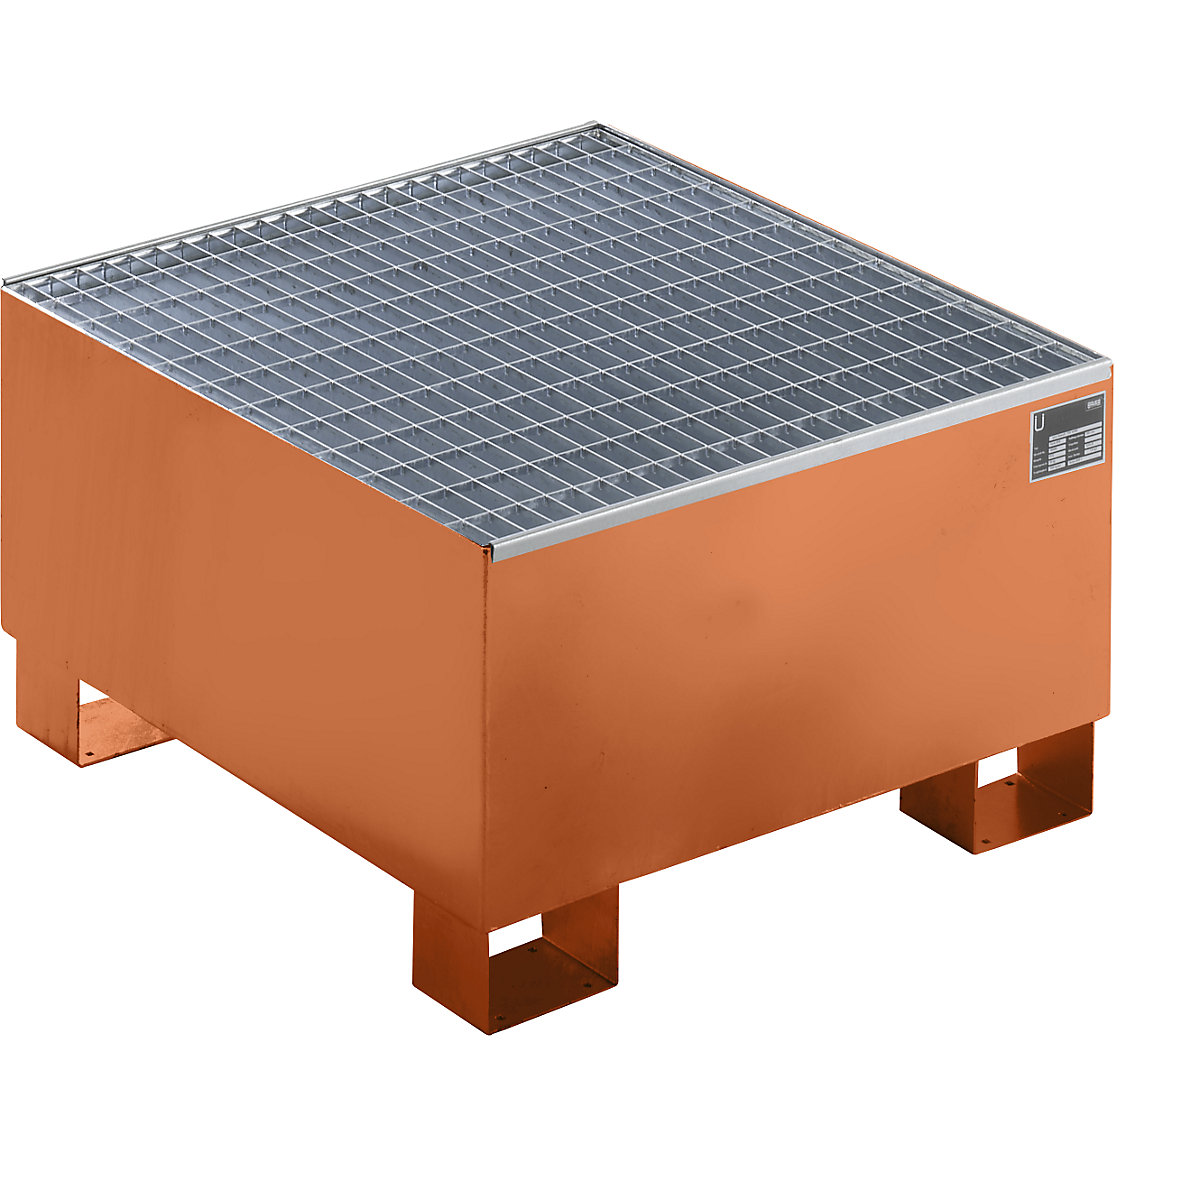 EUROKRAFTbasic – Sump tray made from sheet steel, LxWxH 800 x 800 x 465 mm, orange RAL 2000, with grate